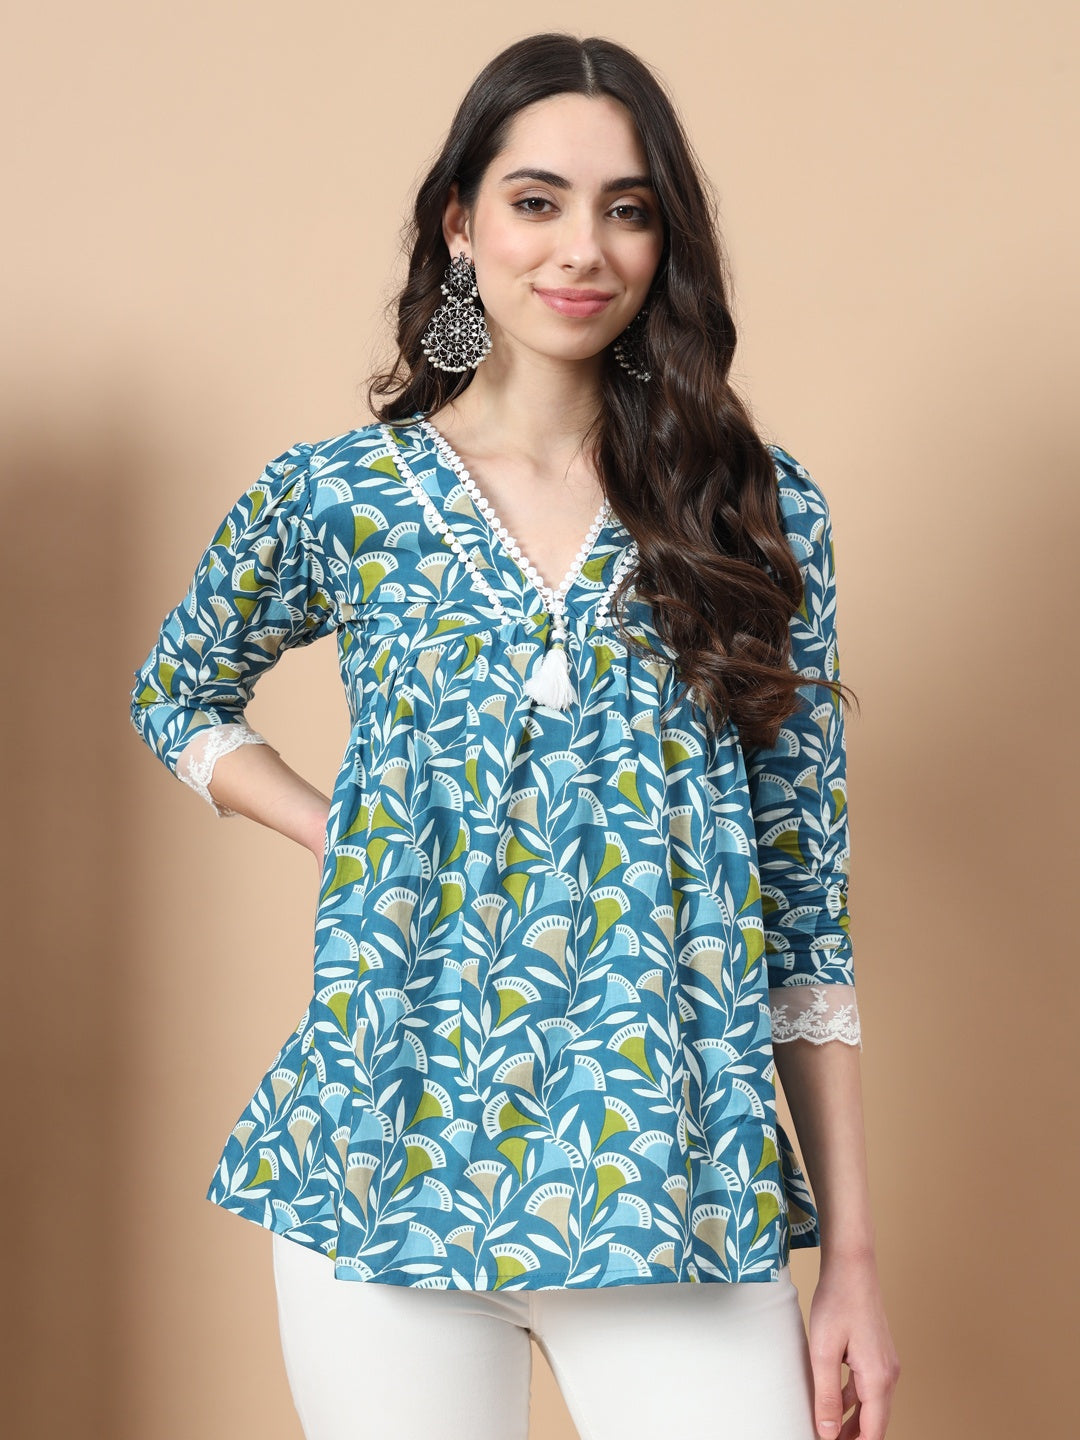 Blue Cotton Floral Printed Top With Lace Details-Yufta Store-1759TOPBLS